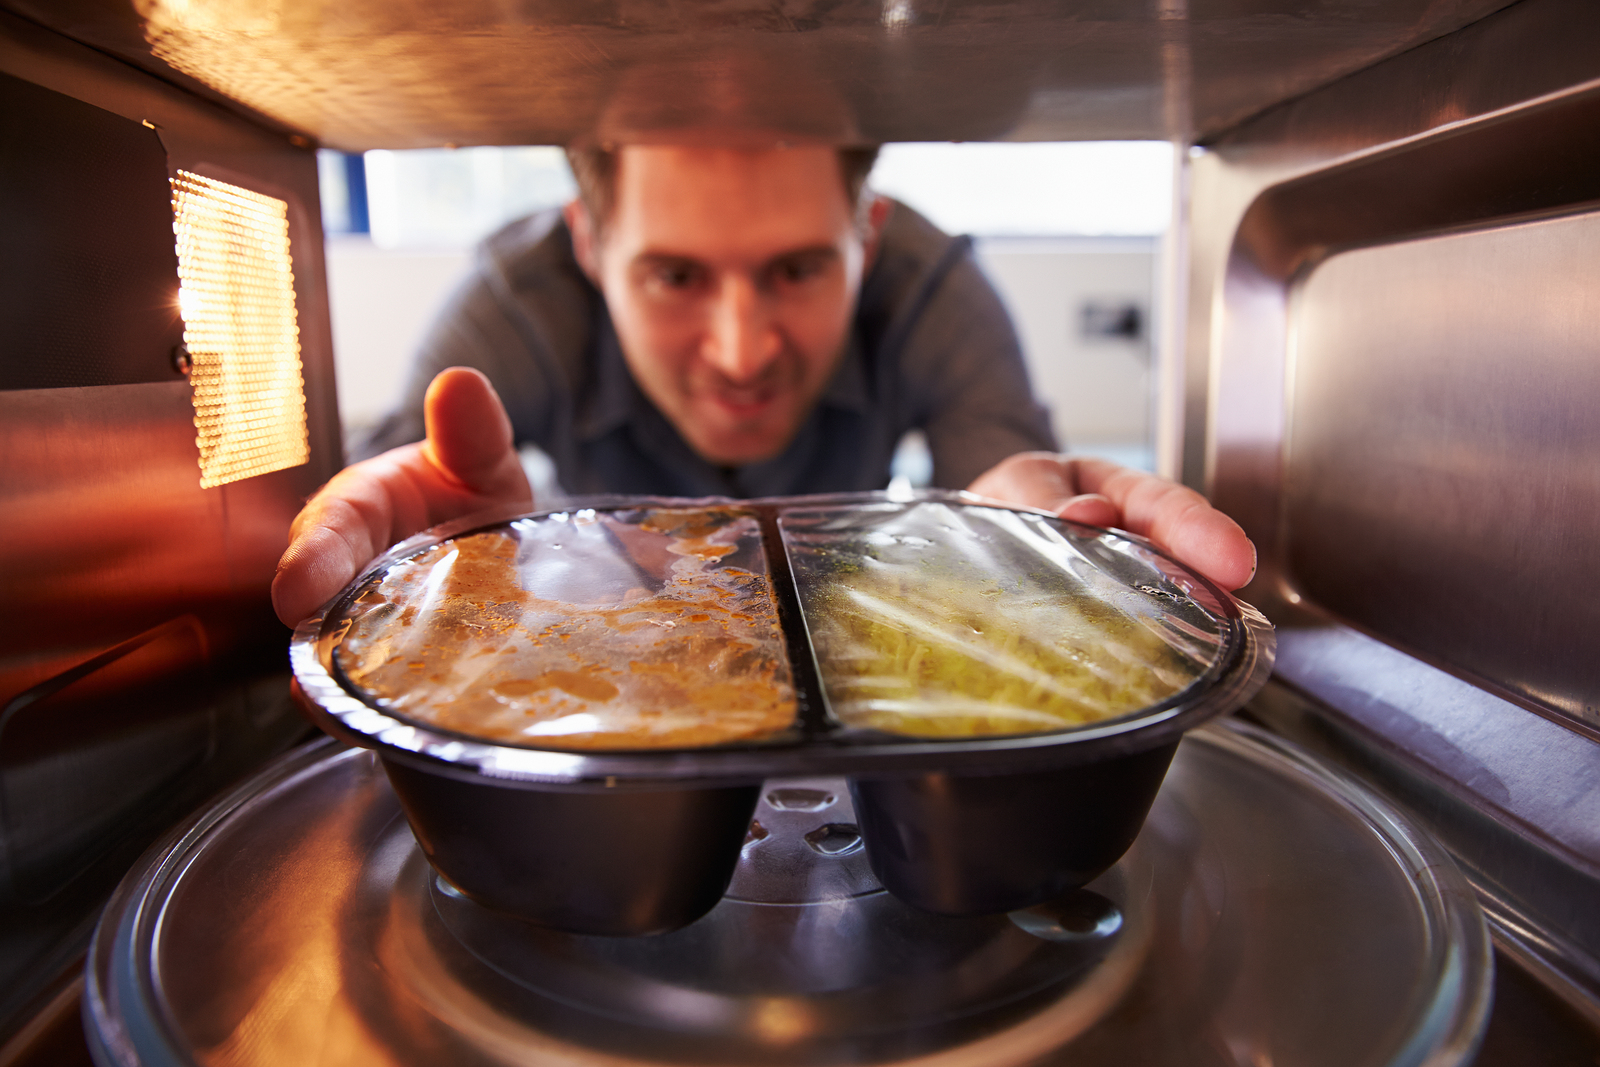 Man Putting TV Dinner Into Microwave Oven To Cook